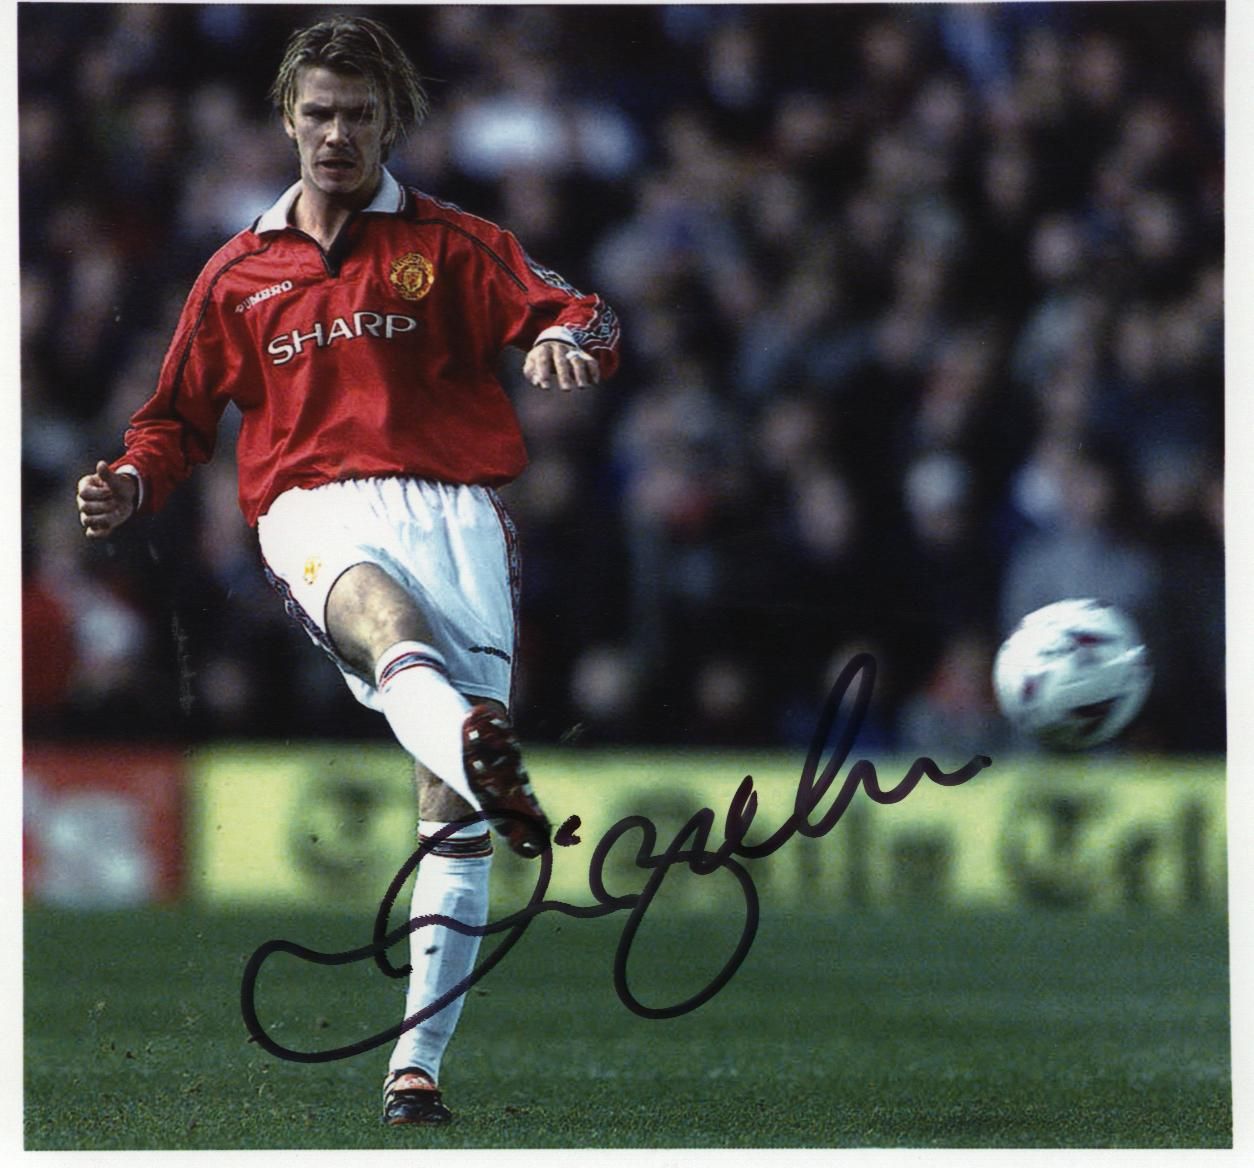 David Beckham in Manchester United colours